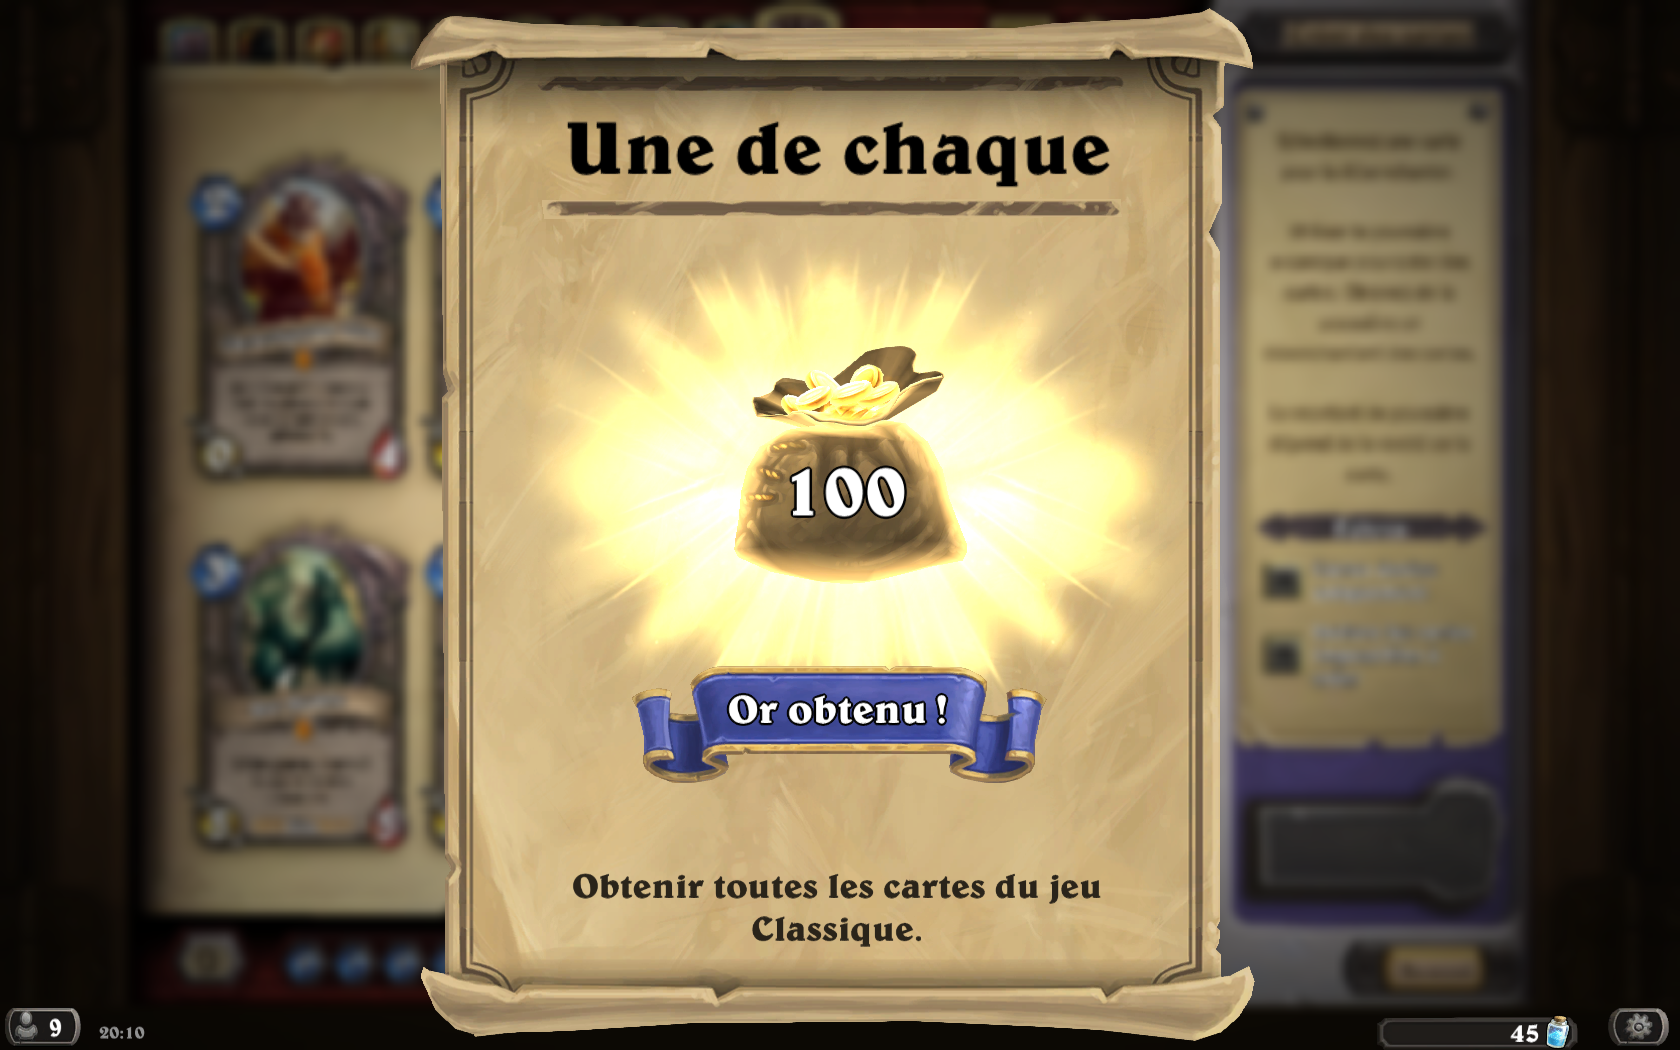 Nom : Hearthstone Screenshot 07-07-16 20.10.03.png
Affichages : 169
Taille : 1,30 Mo